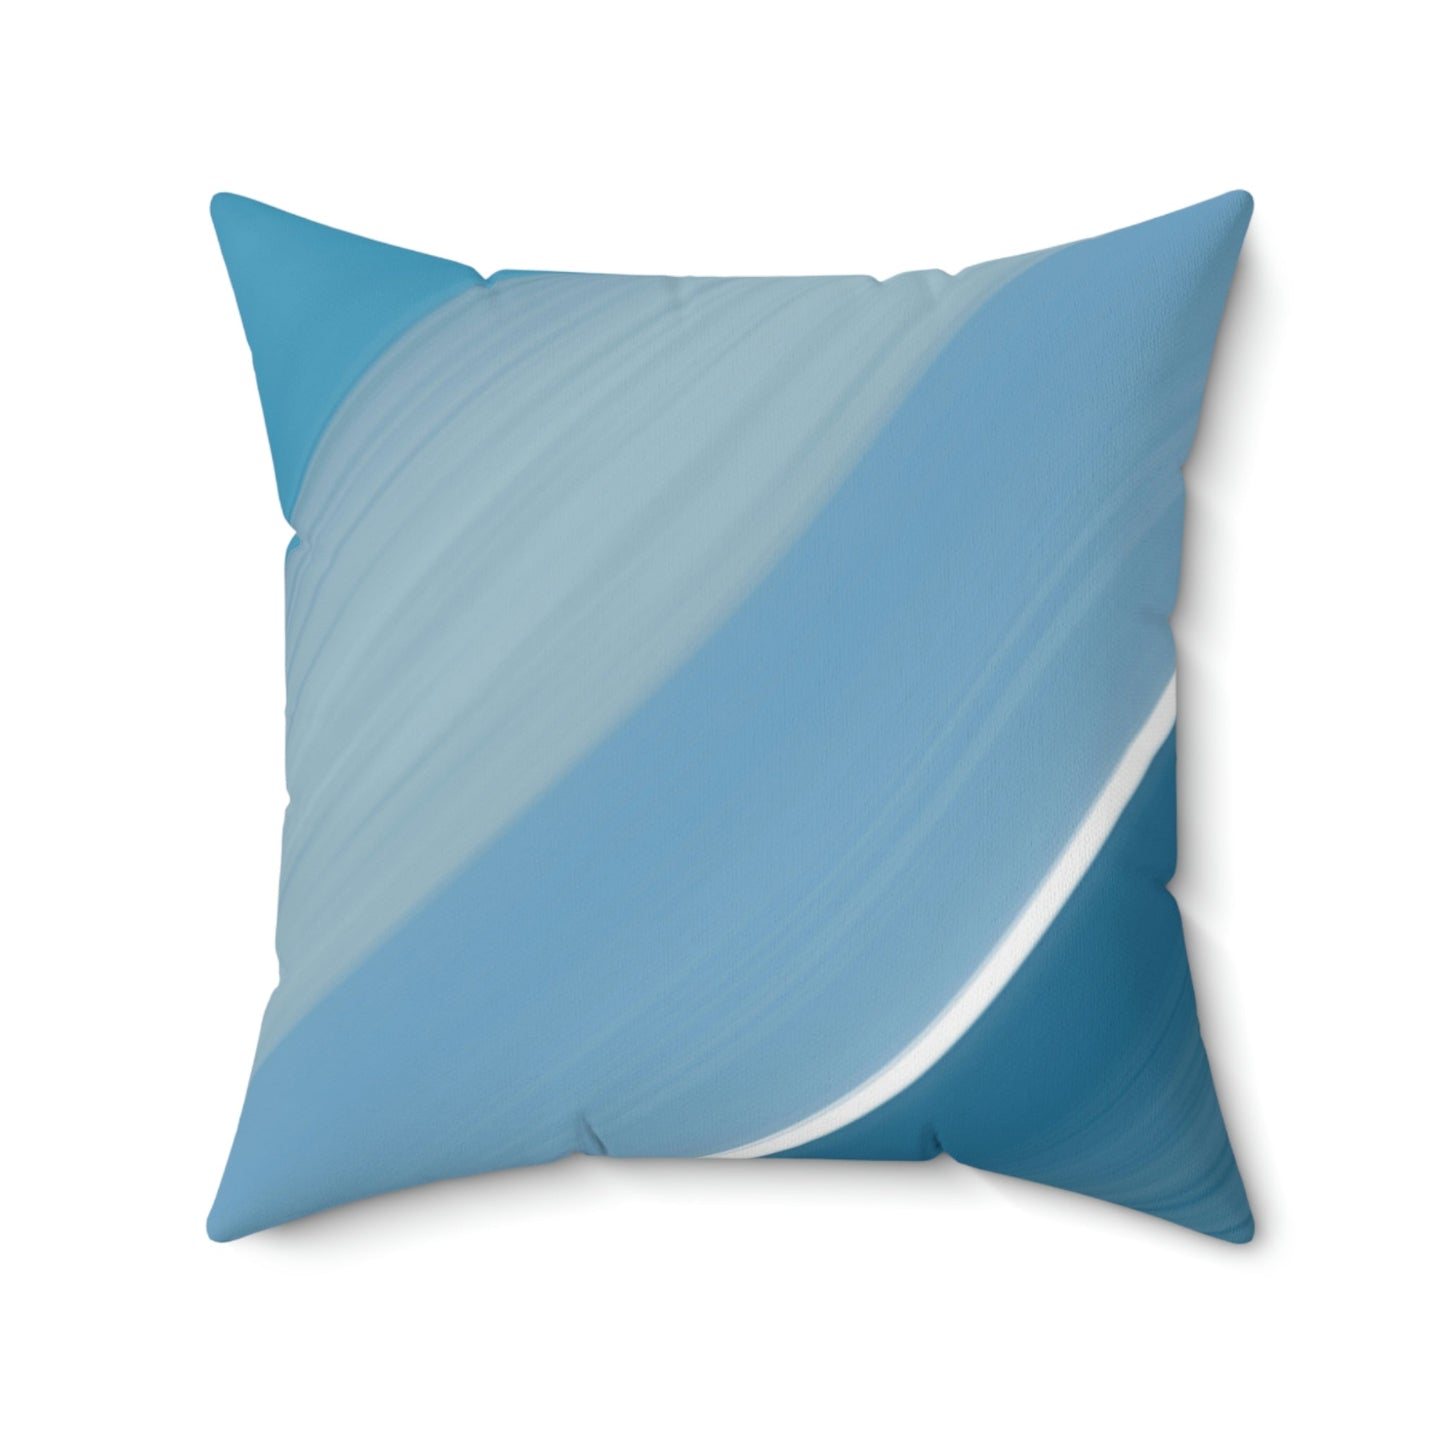 Feeling So Blue Square Pillow Home Decor Pink Sweetheart